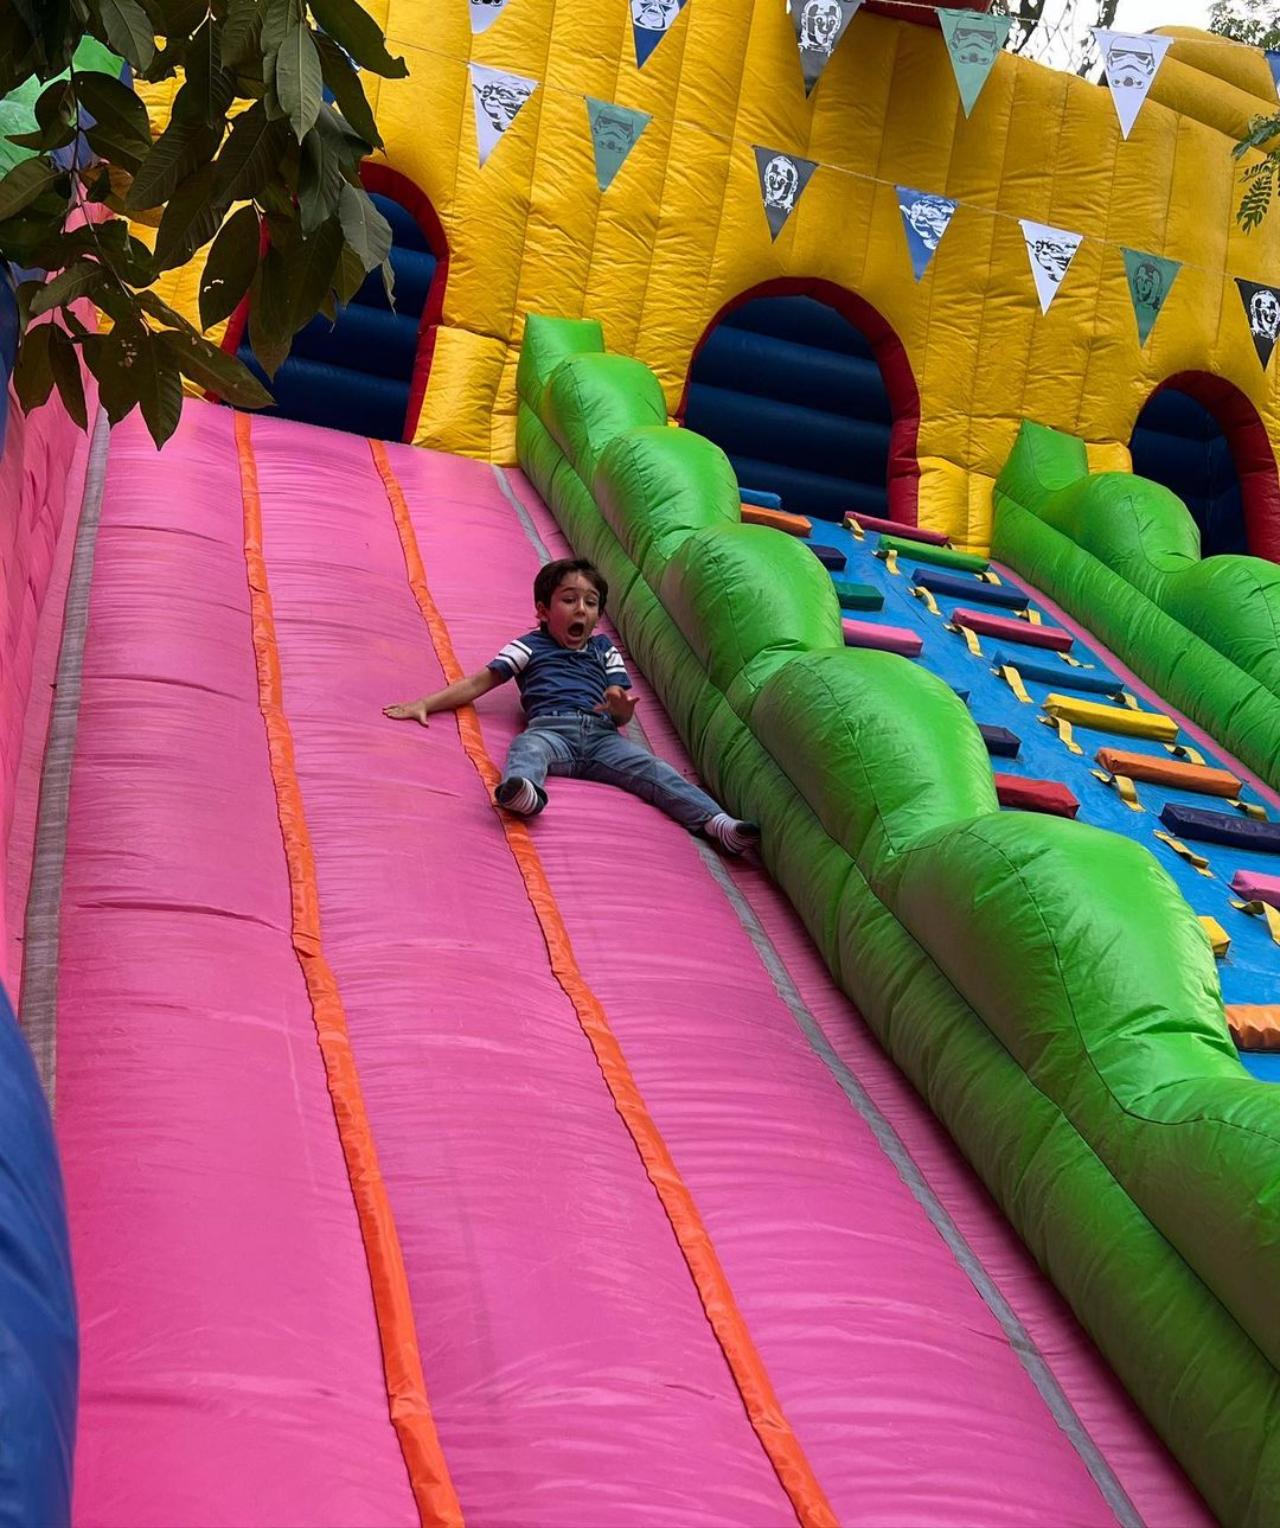 Kareena took to her Instagram handle to share a picture of Taimur sliding on the bouncy slide. Sharing the happy picture of Taimur, Kareena wrote, 